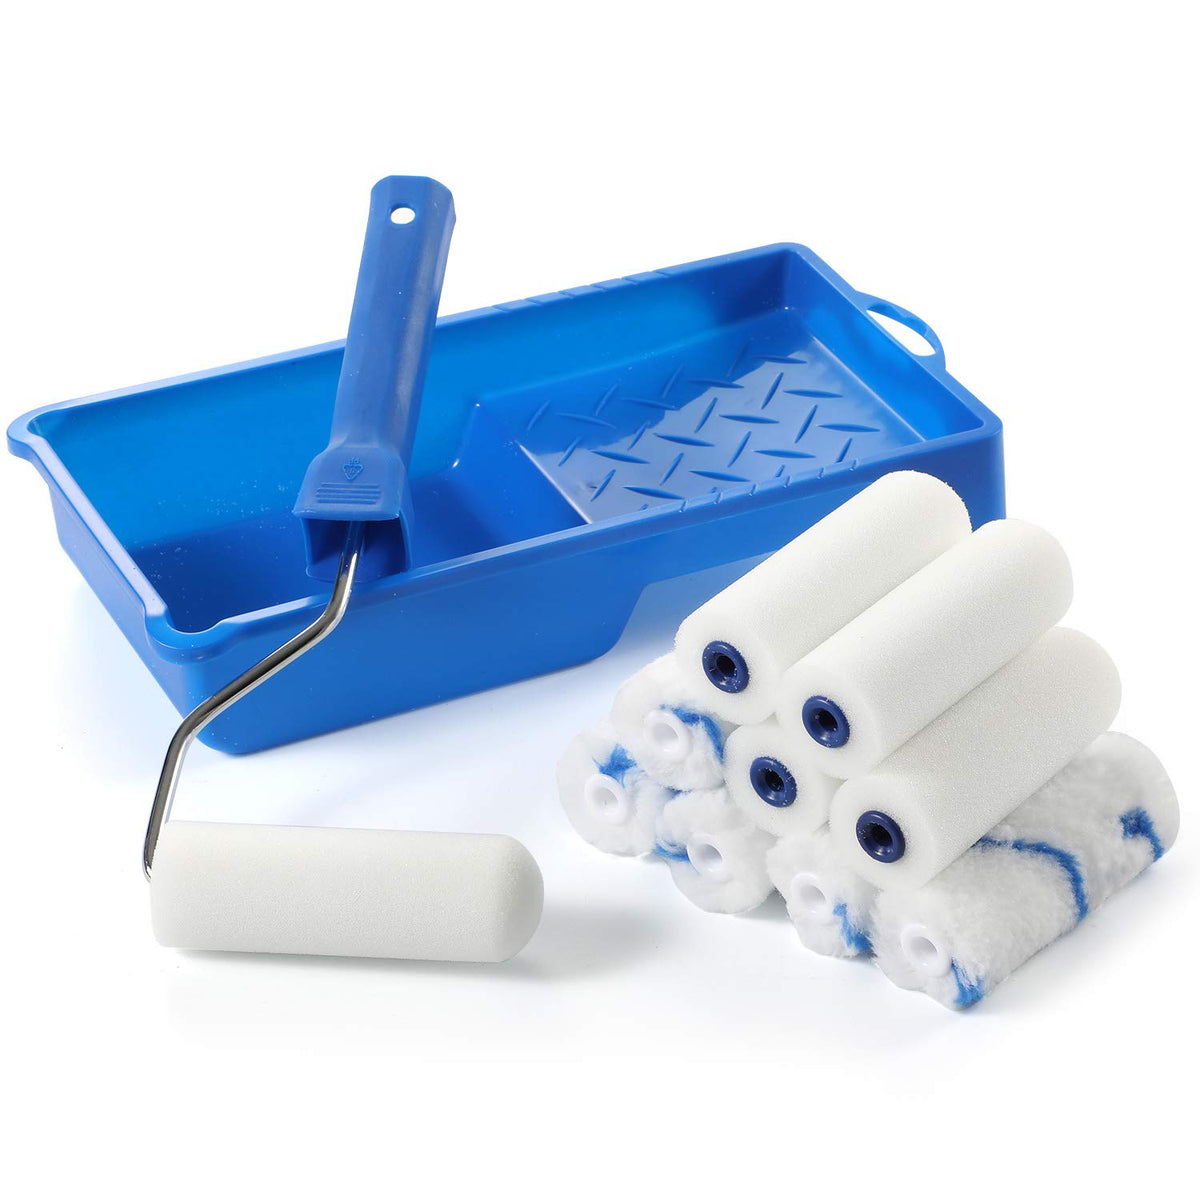 【Upgraded】16pcs 2 Inch Small Paint Roller Kit with 6 High-Density Foam  Paint Roller and 6 Microfiber Roller Covers (3/8” Nap), Mini Paint Roller  Tray